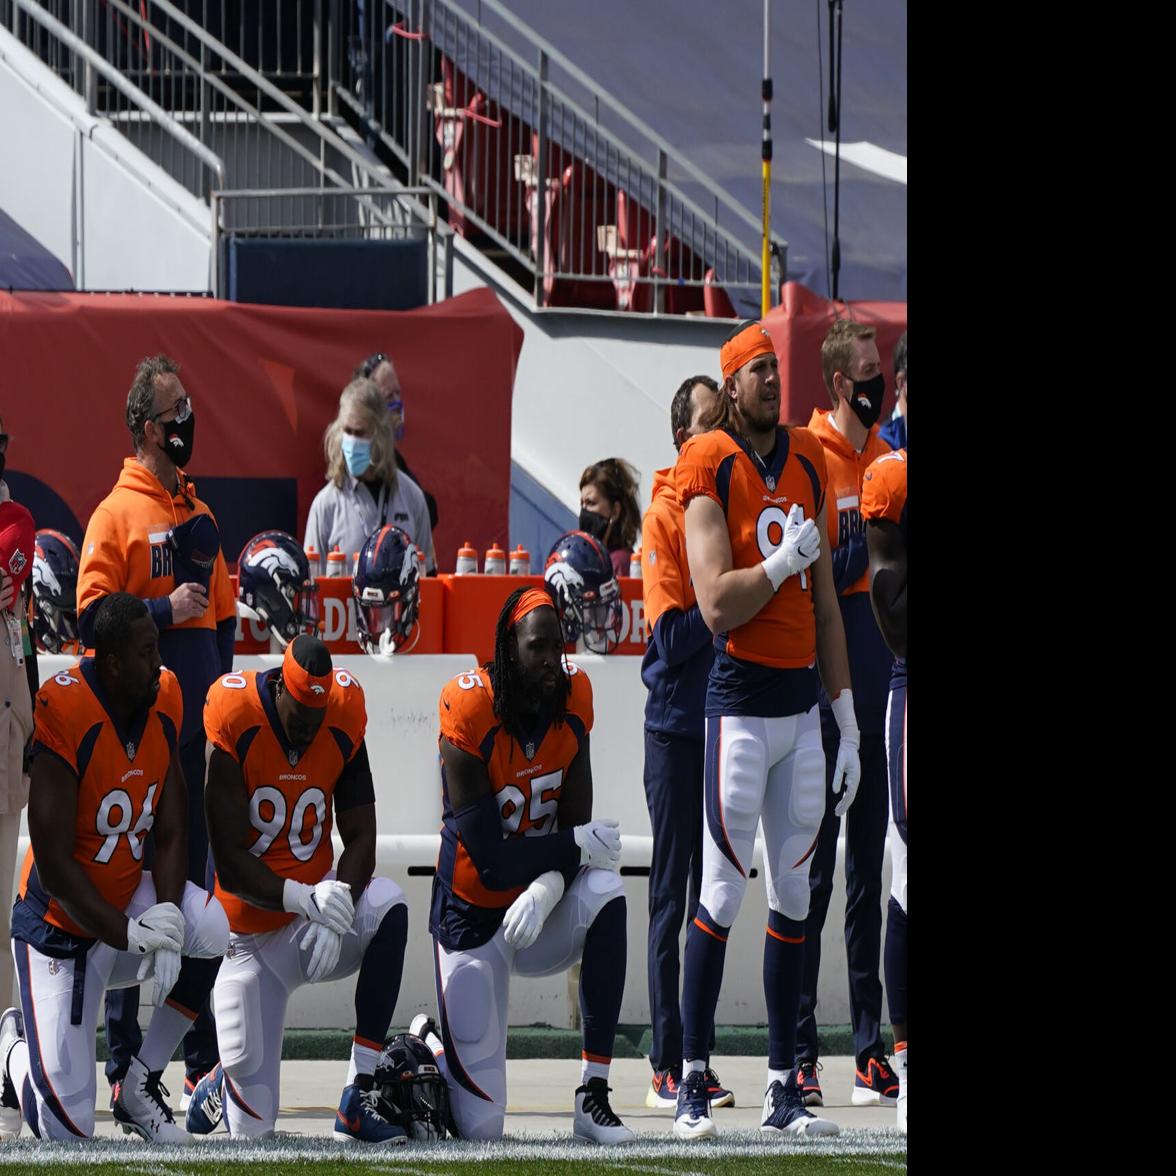 Black national anthem' to be played before all NFL games. Good.